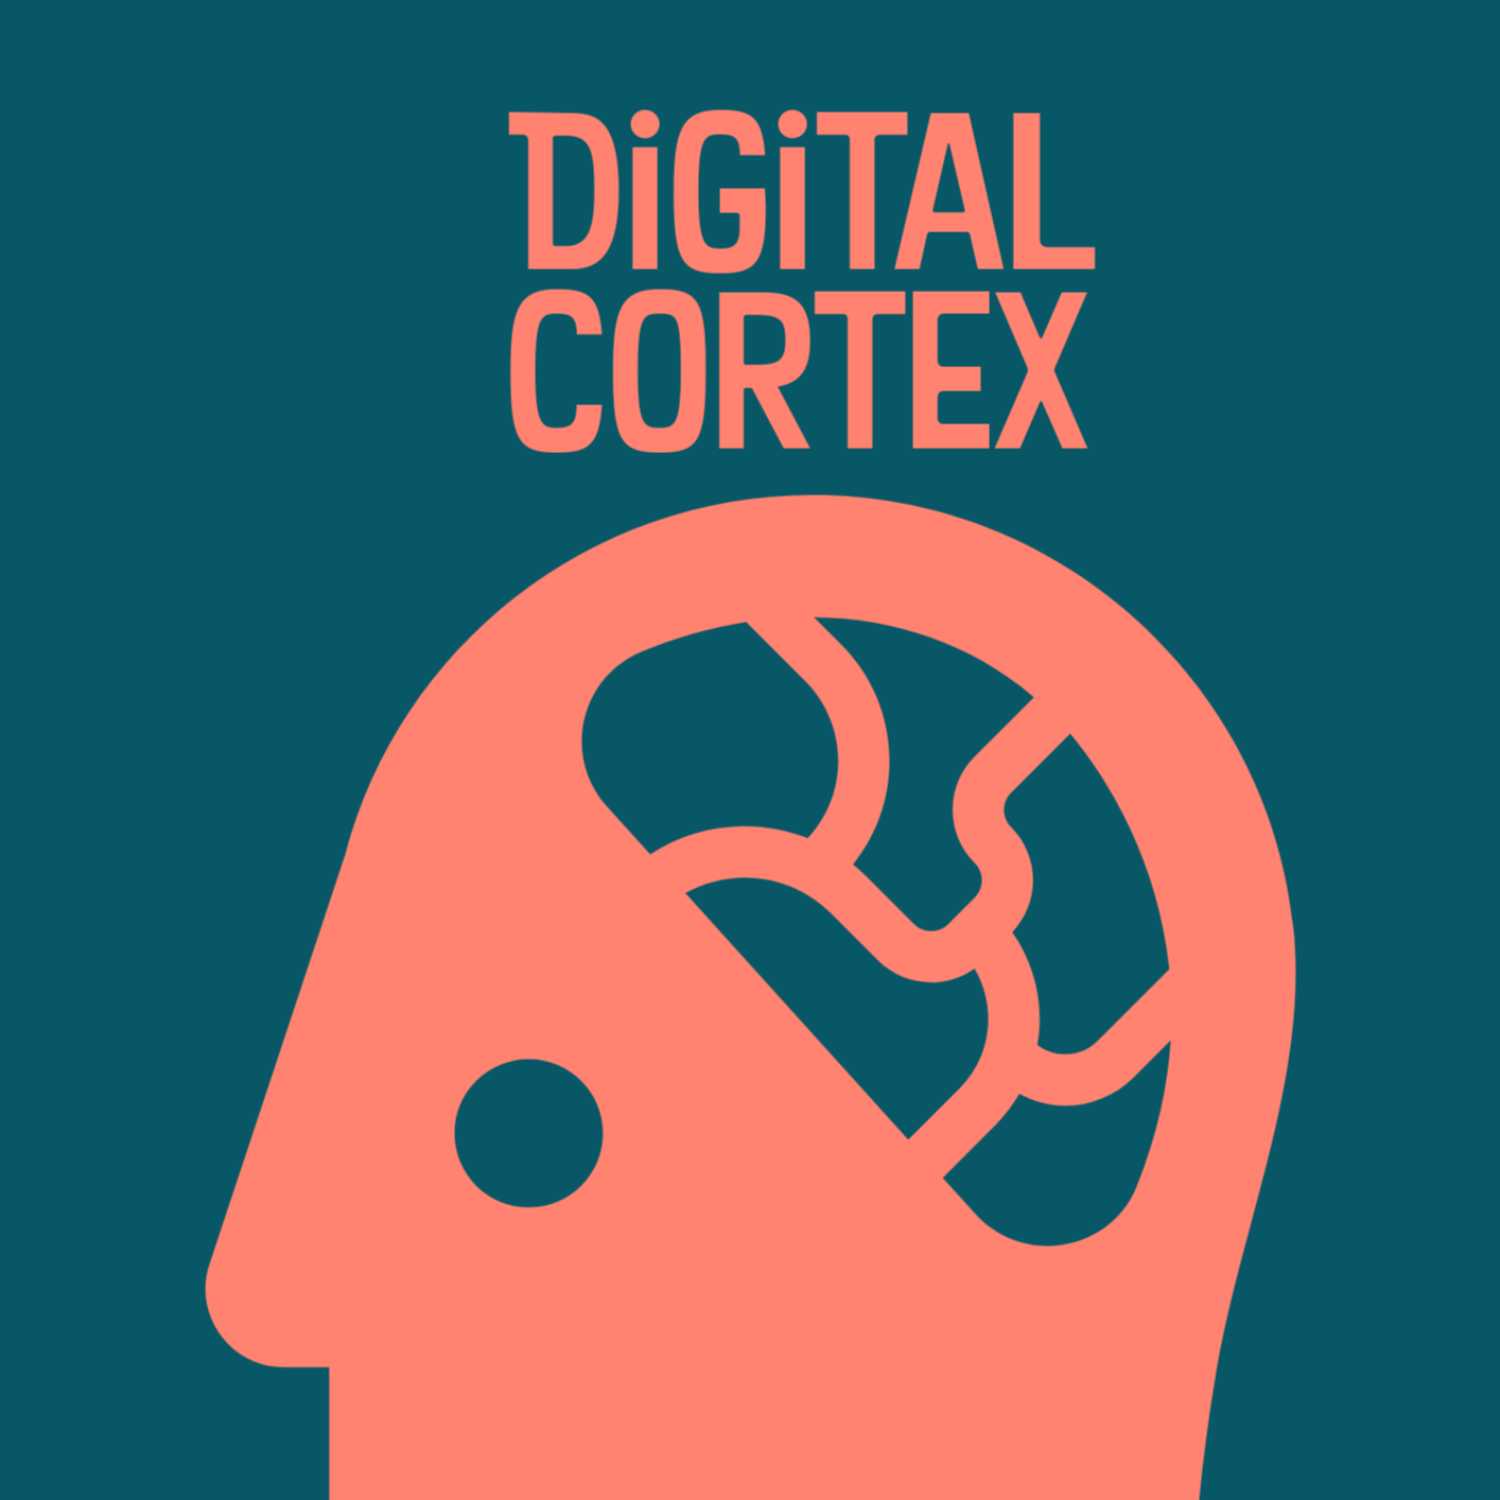 #69 Digital Cortex Gets Existential on New Technologies